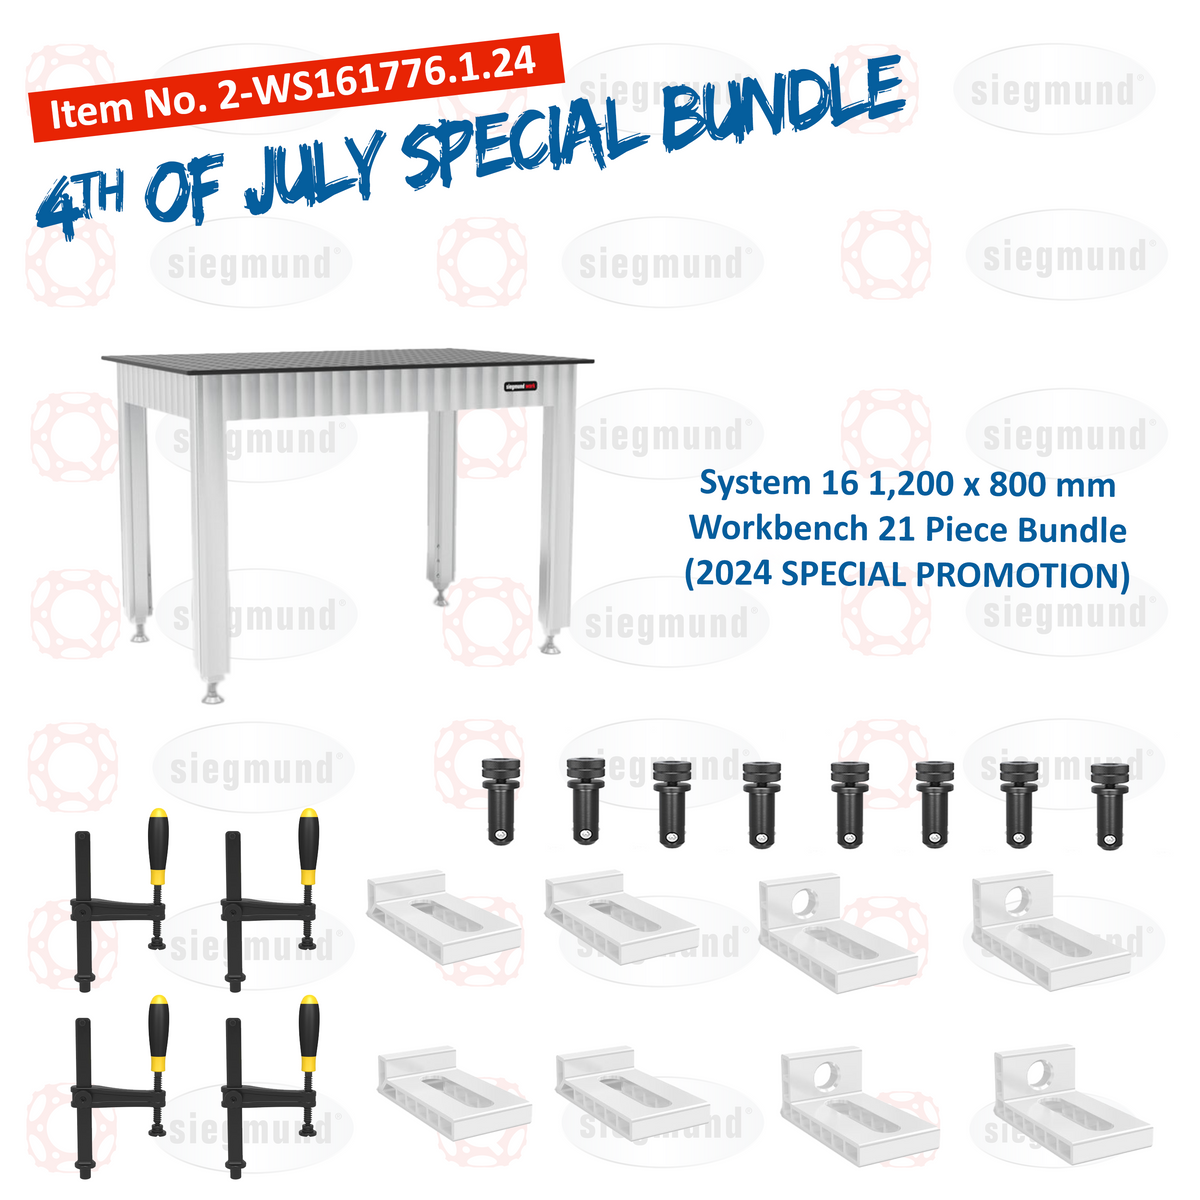 2-WS161776.1.24: 1,200x800mm System 16 Workbench, 21 Piece Bundle (JULY 4TH, 2024 SPECIAL PROMOTION)